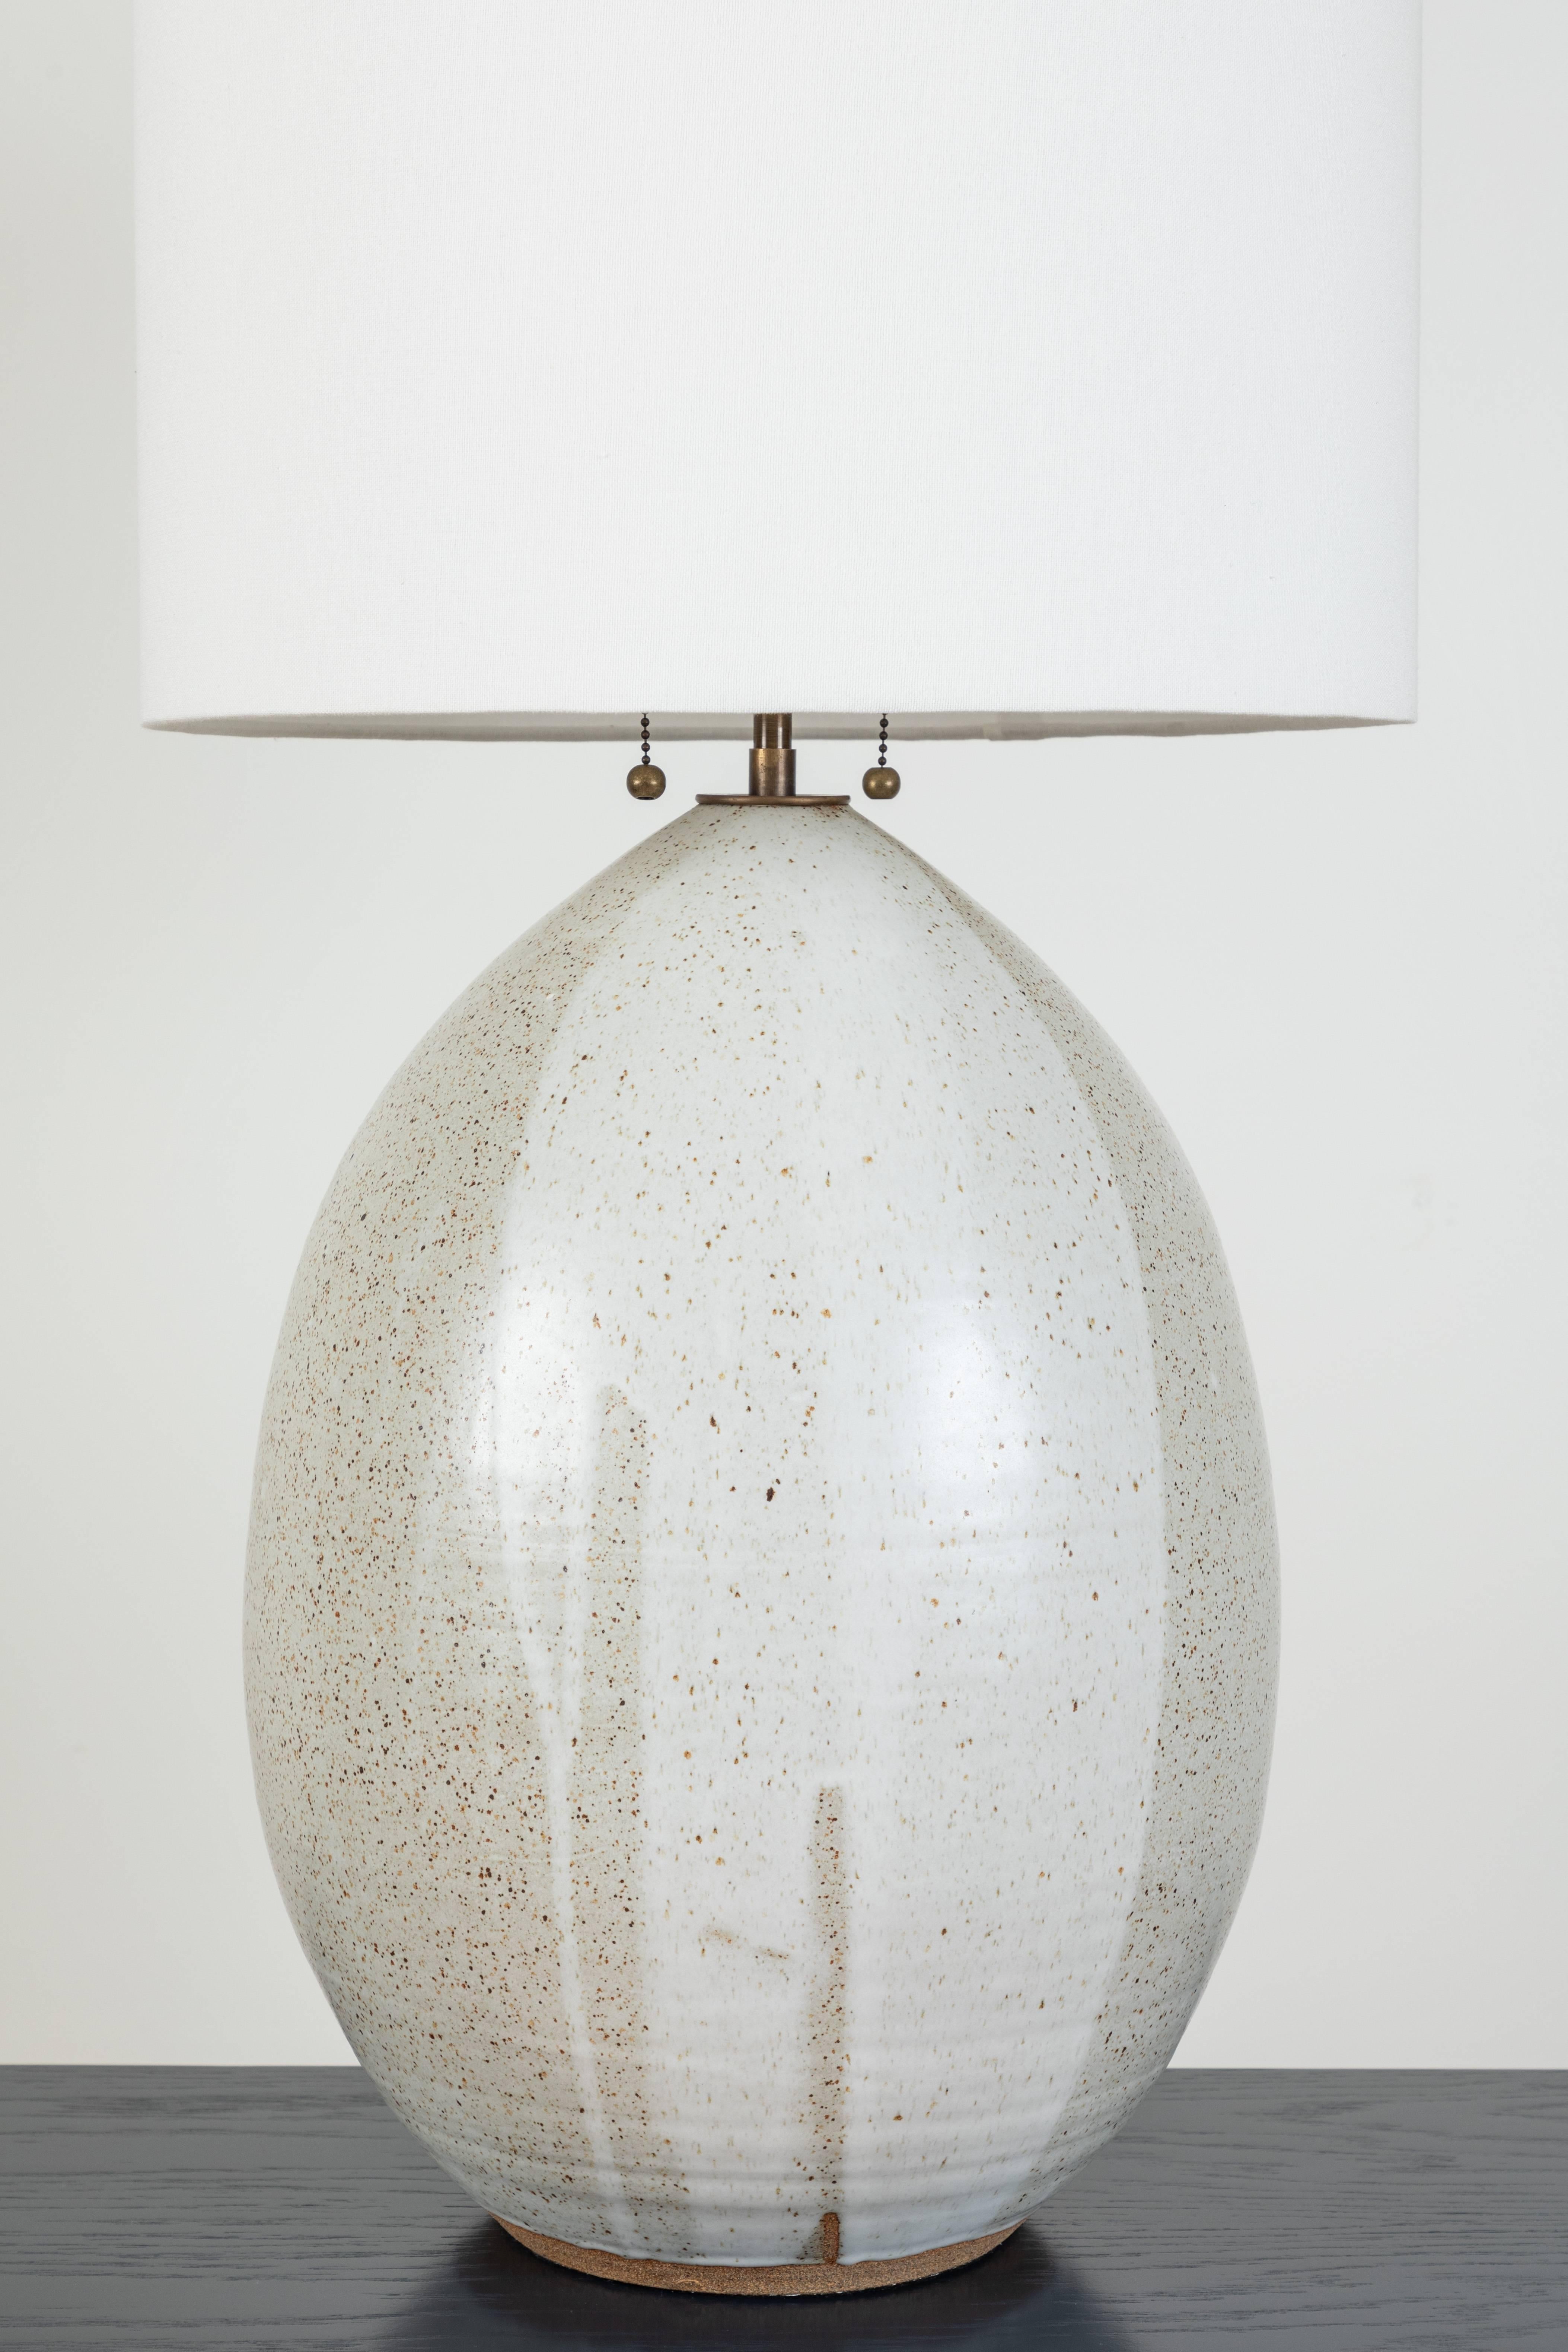 Pair of extra large pod lamps by Victoria Morris for Lawson-Fenning.